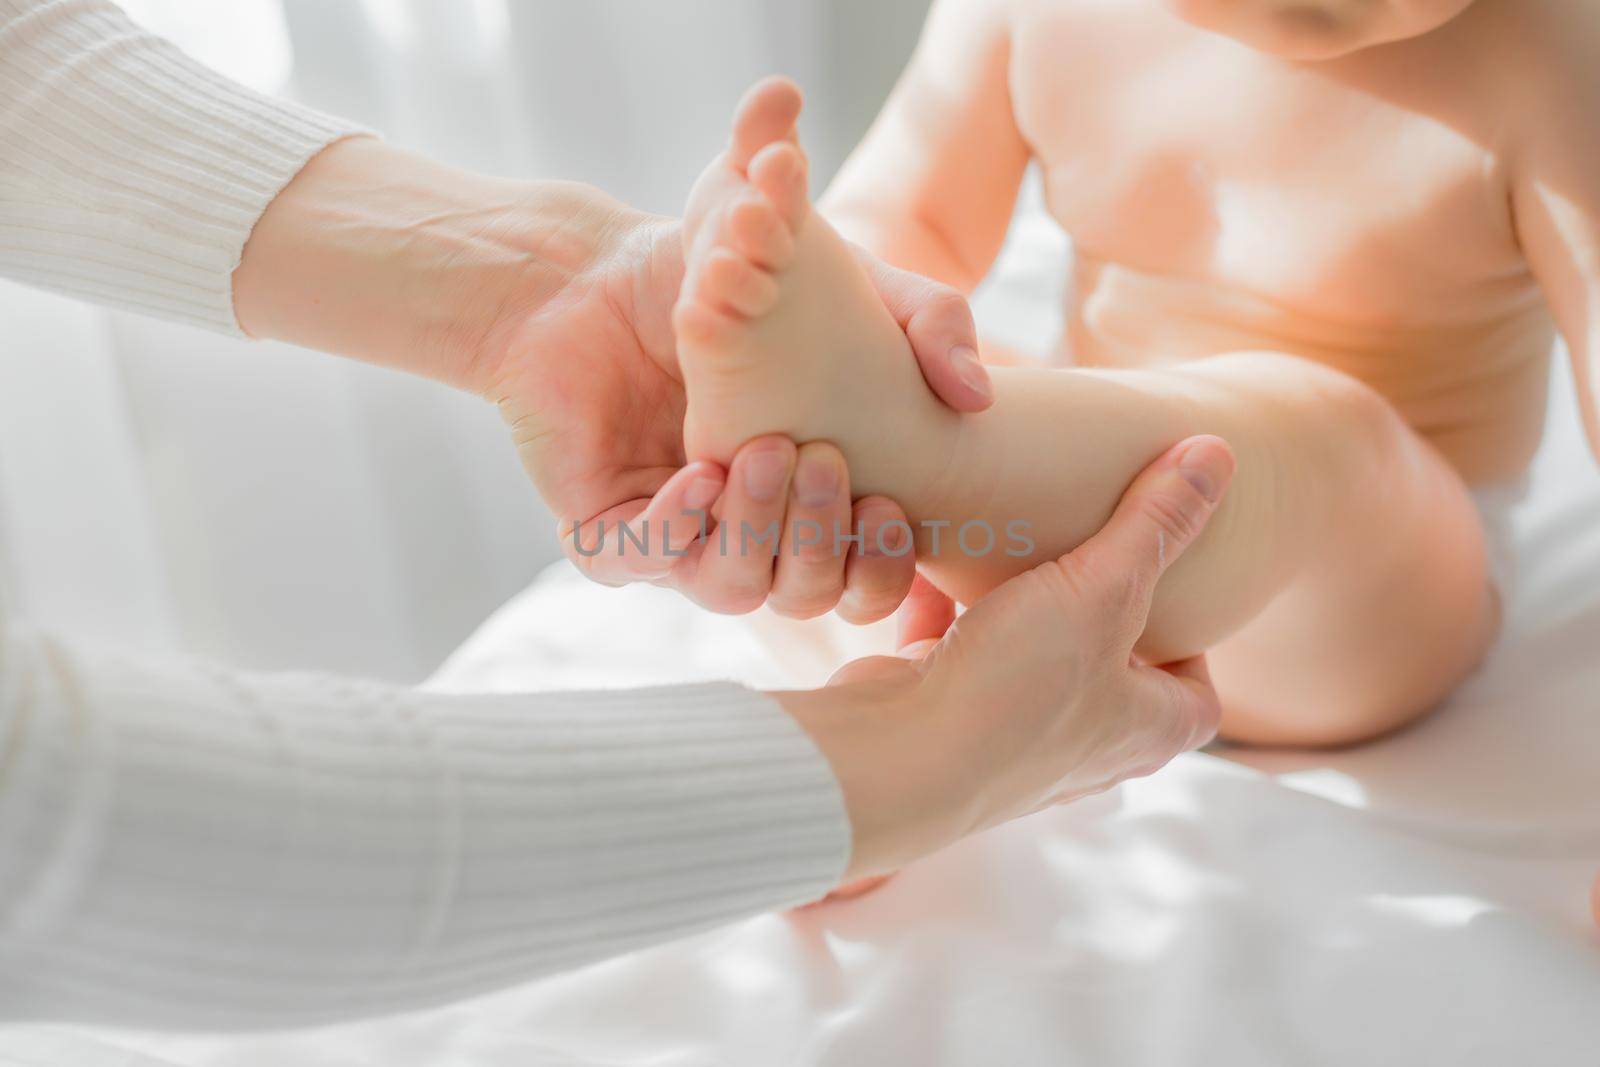 Mom gives her baby a leg and foot massage. Close-up. by Yurich32